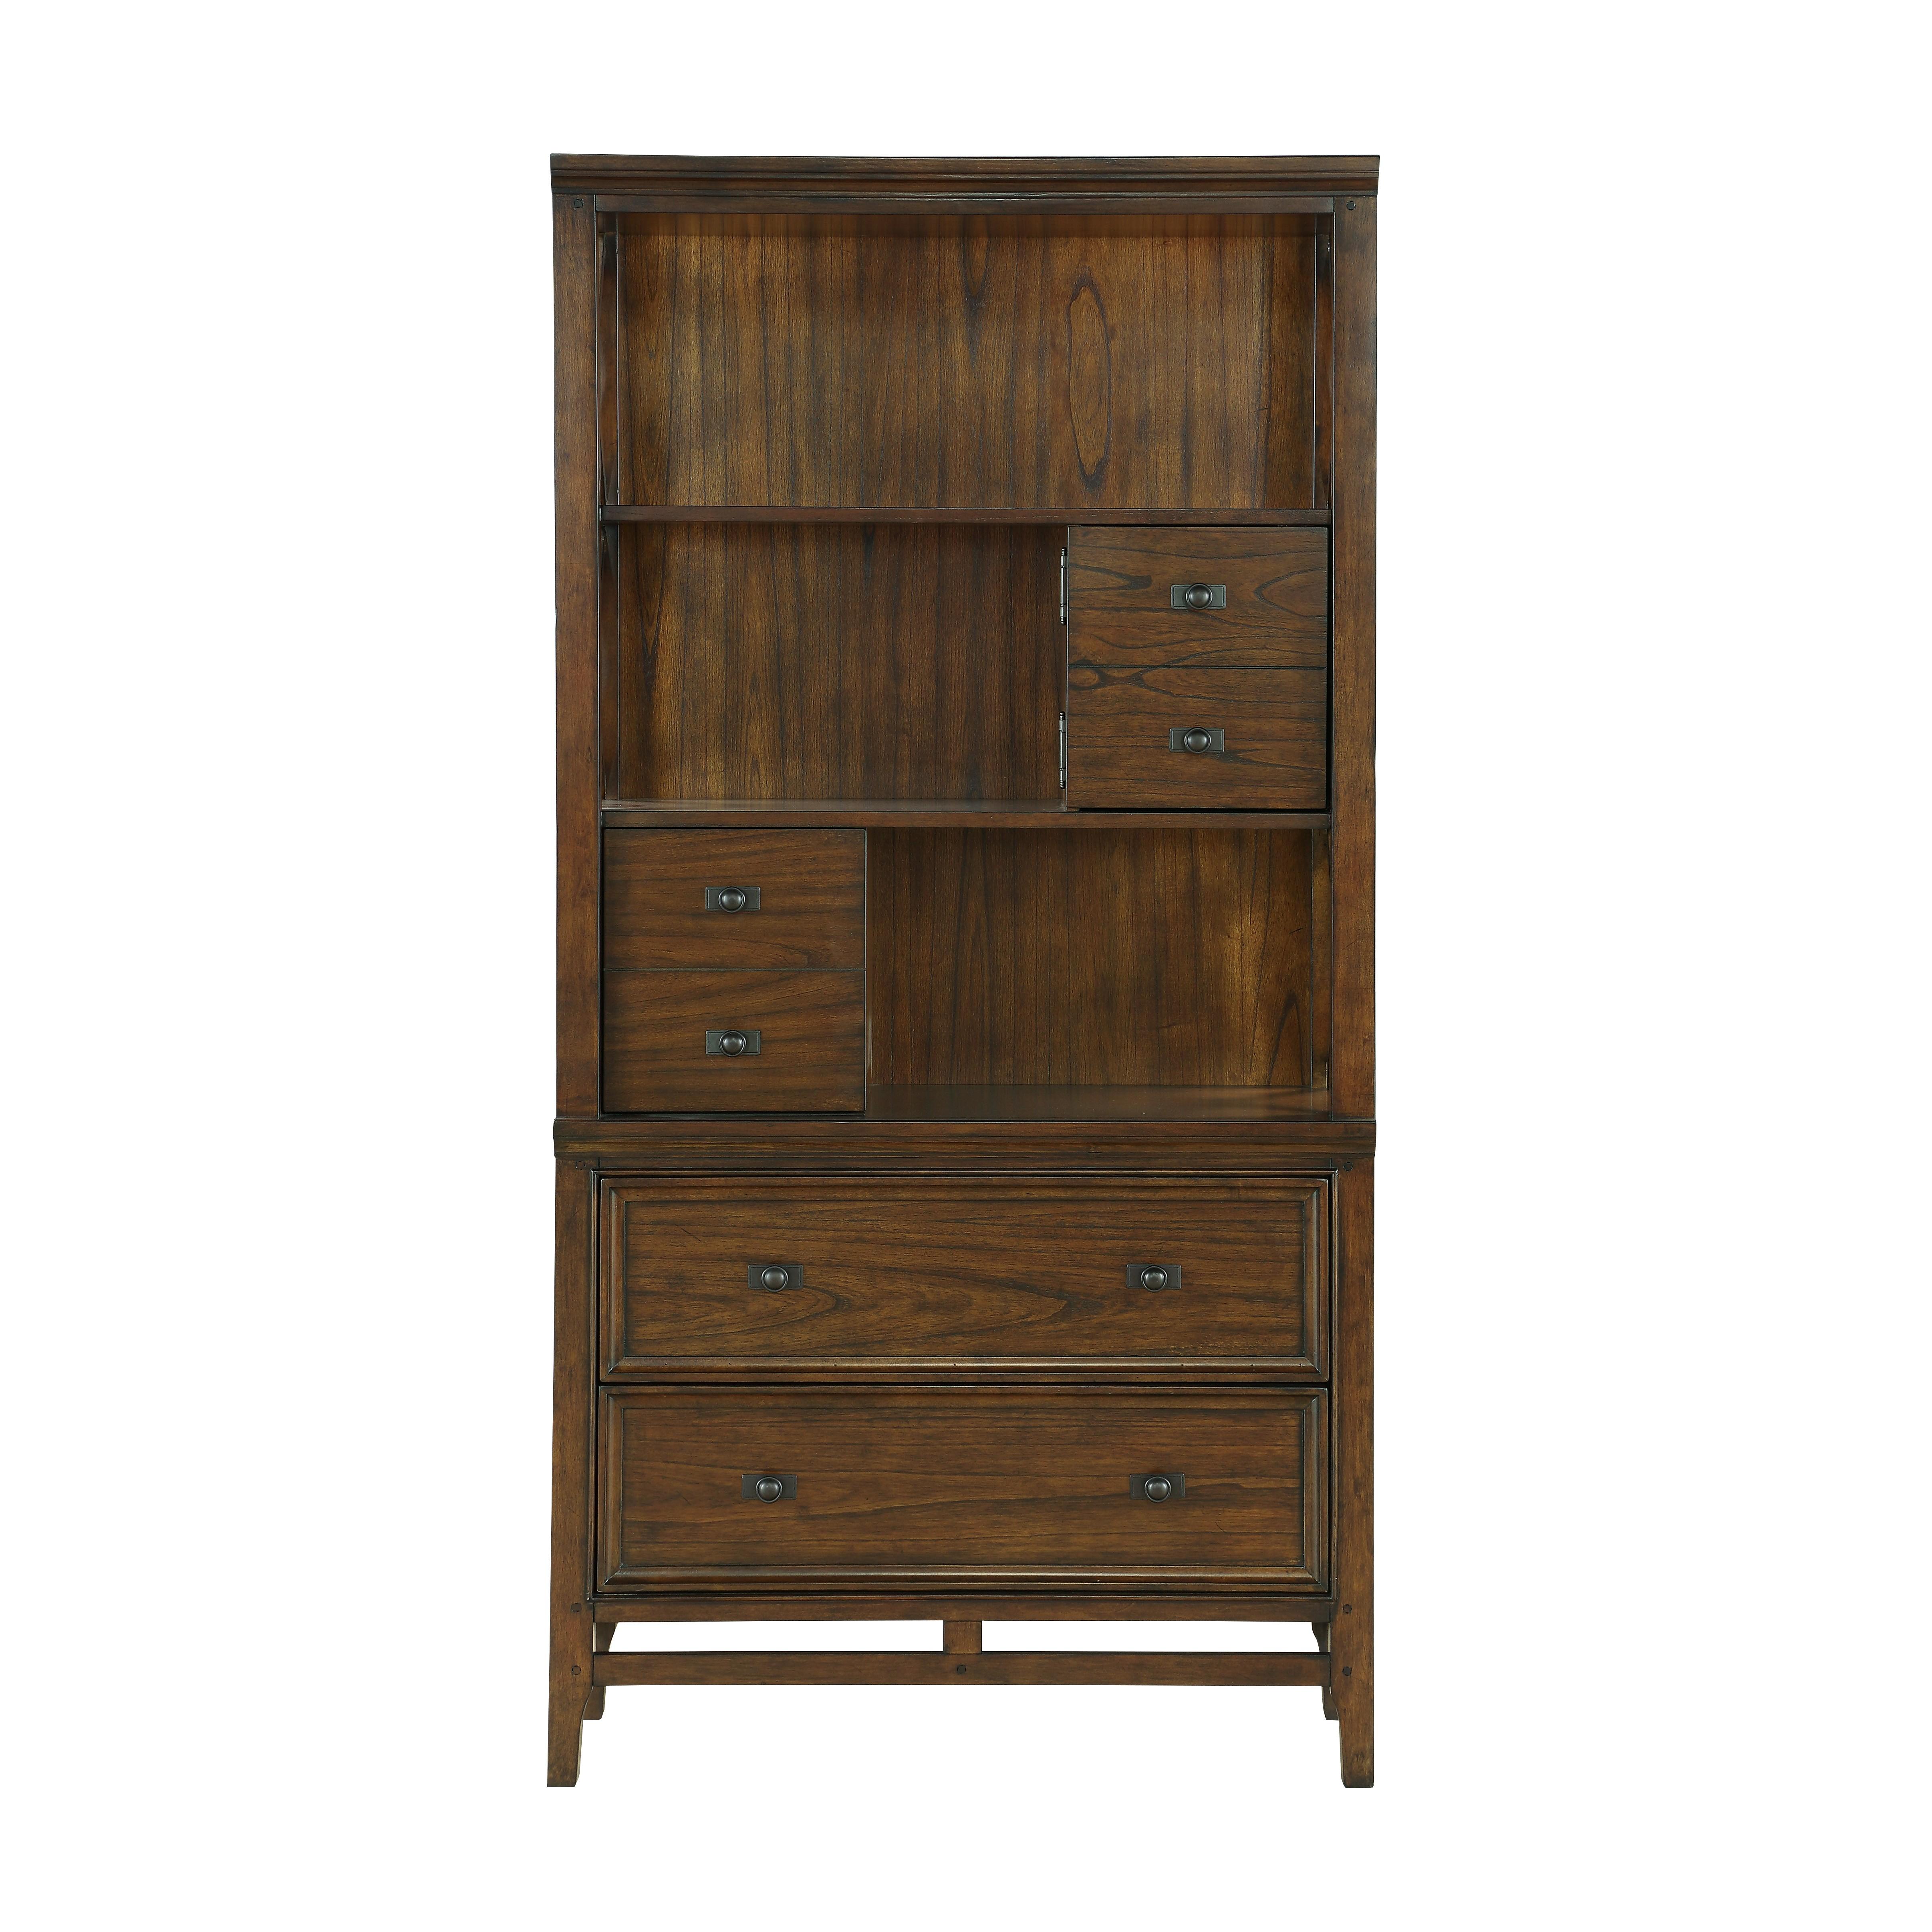 

    
Traditional Brown Cherry Wood Bookcase Homelegance 1649-18 Frazier Park
